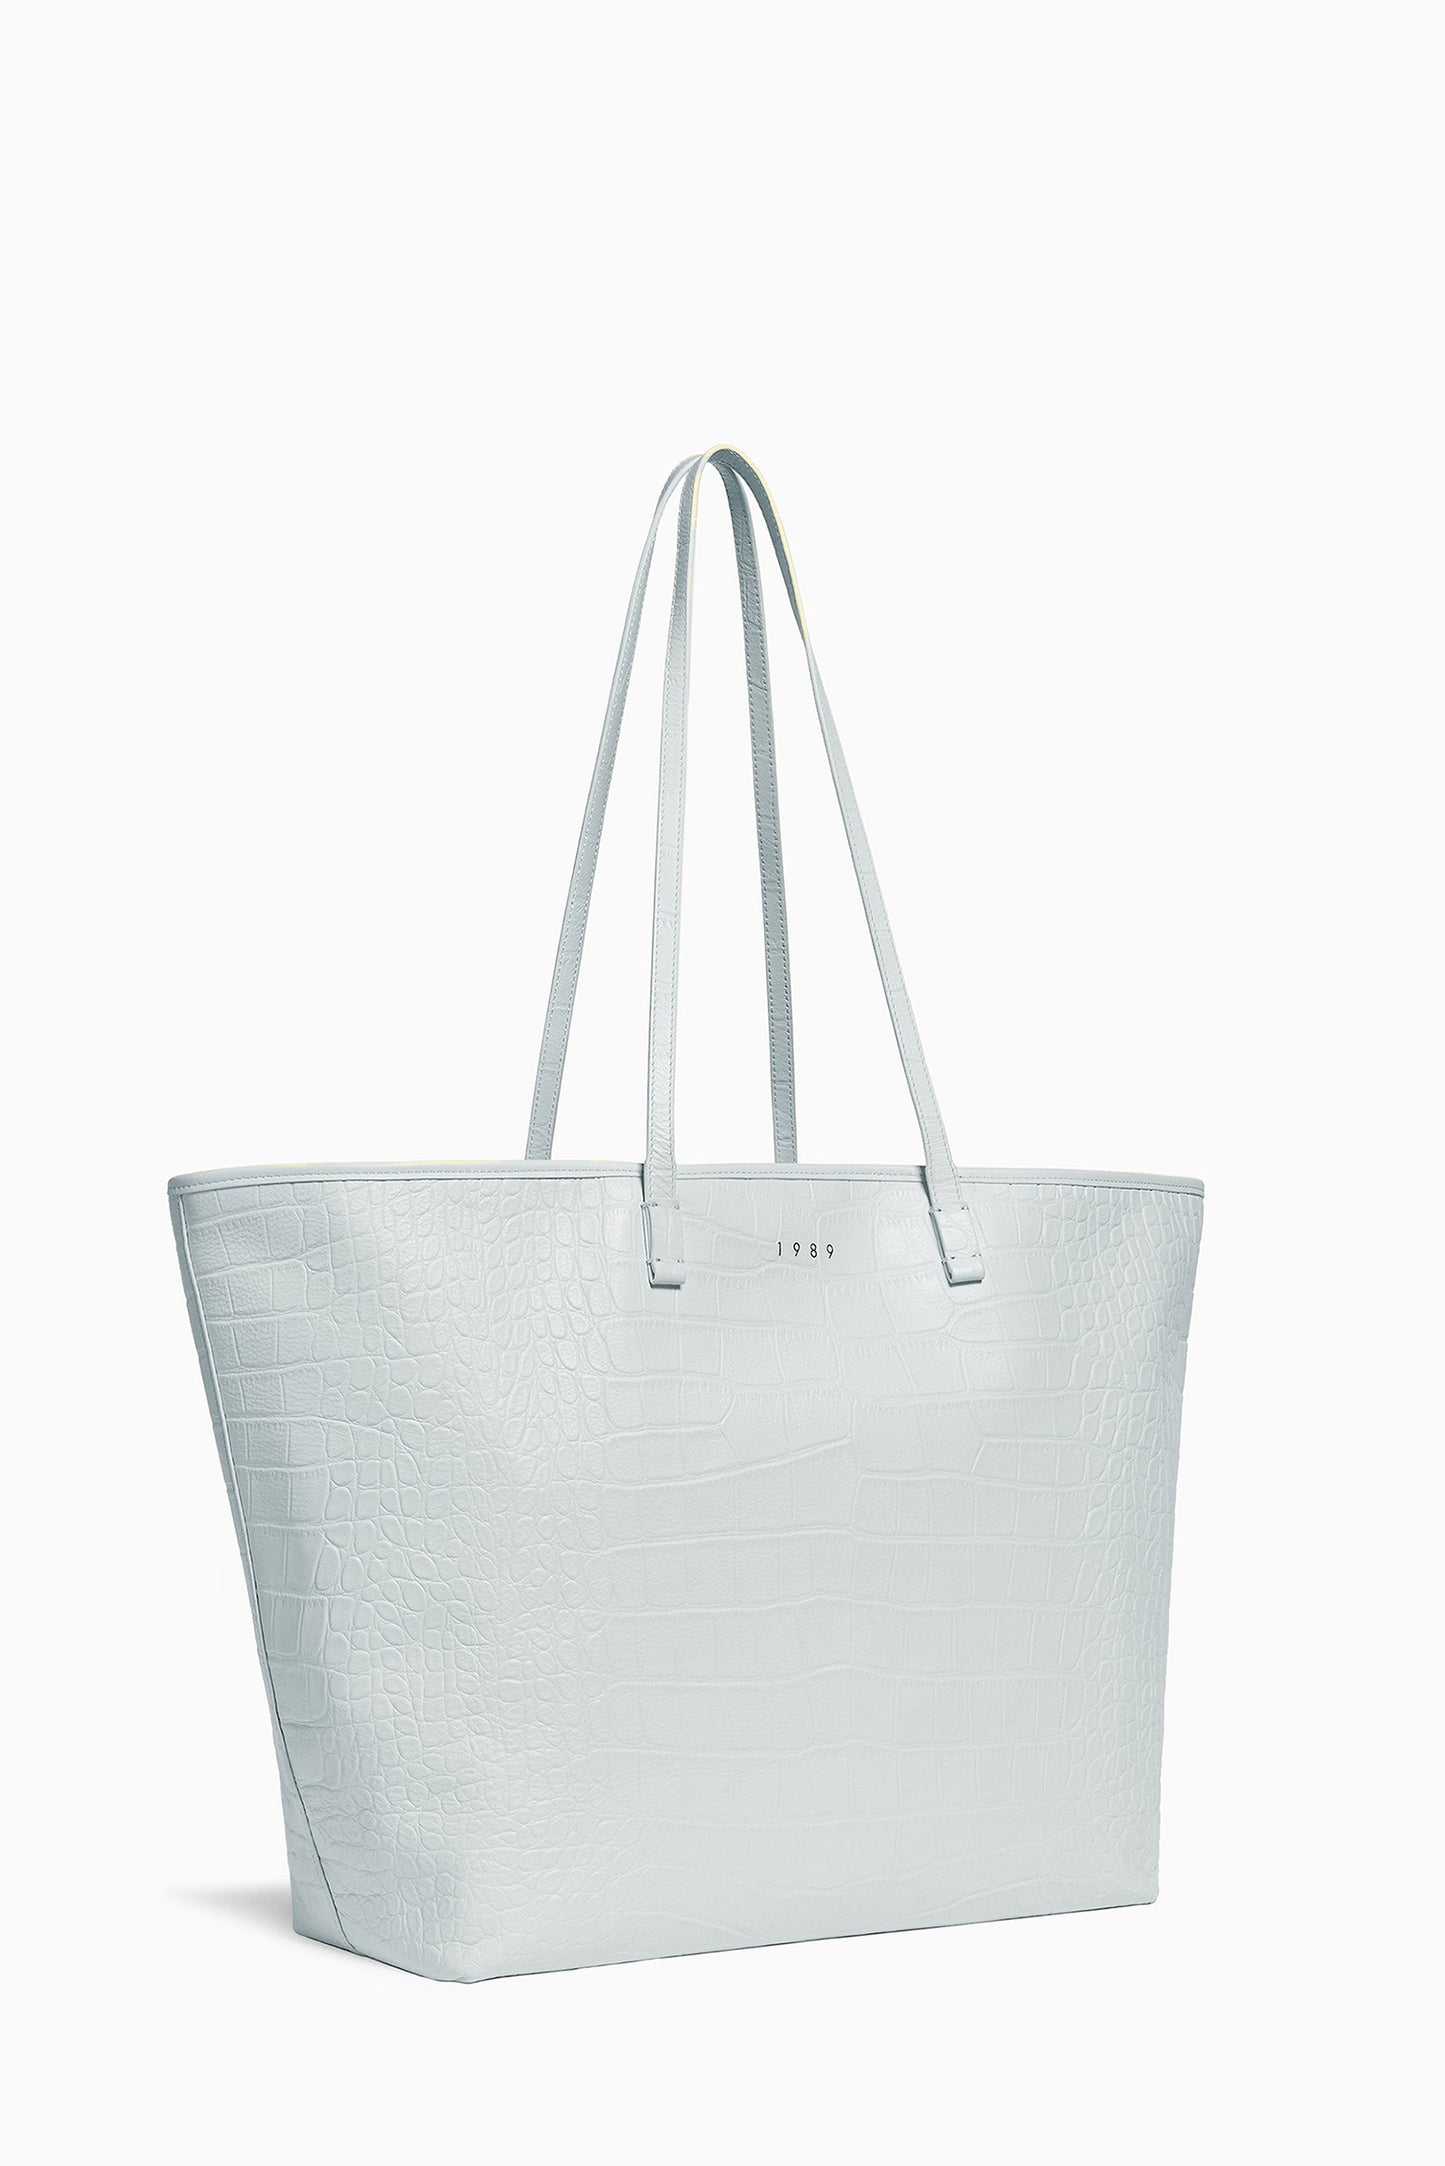 Woman's Mid Tote Bag